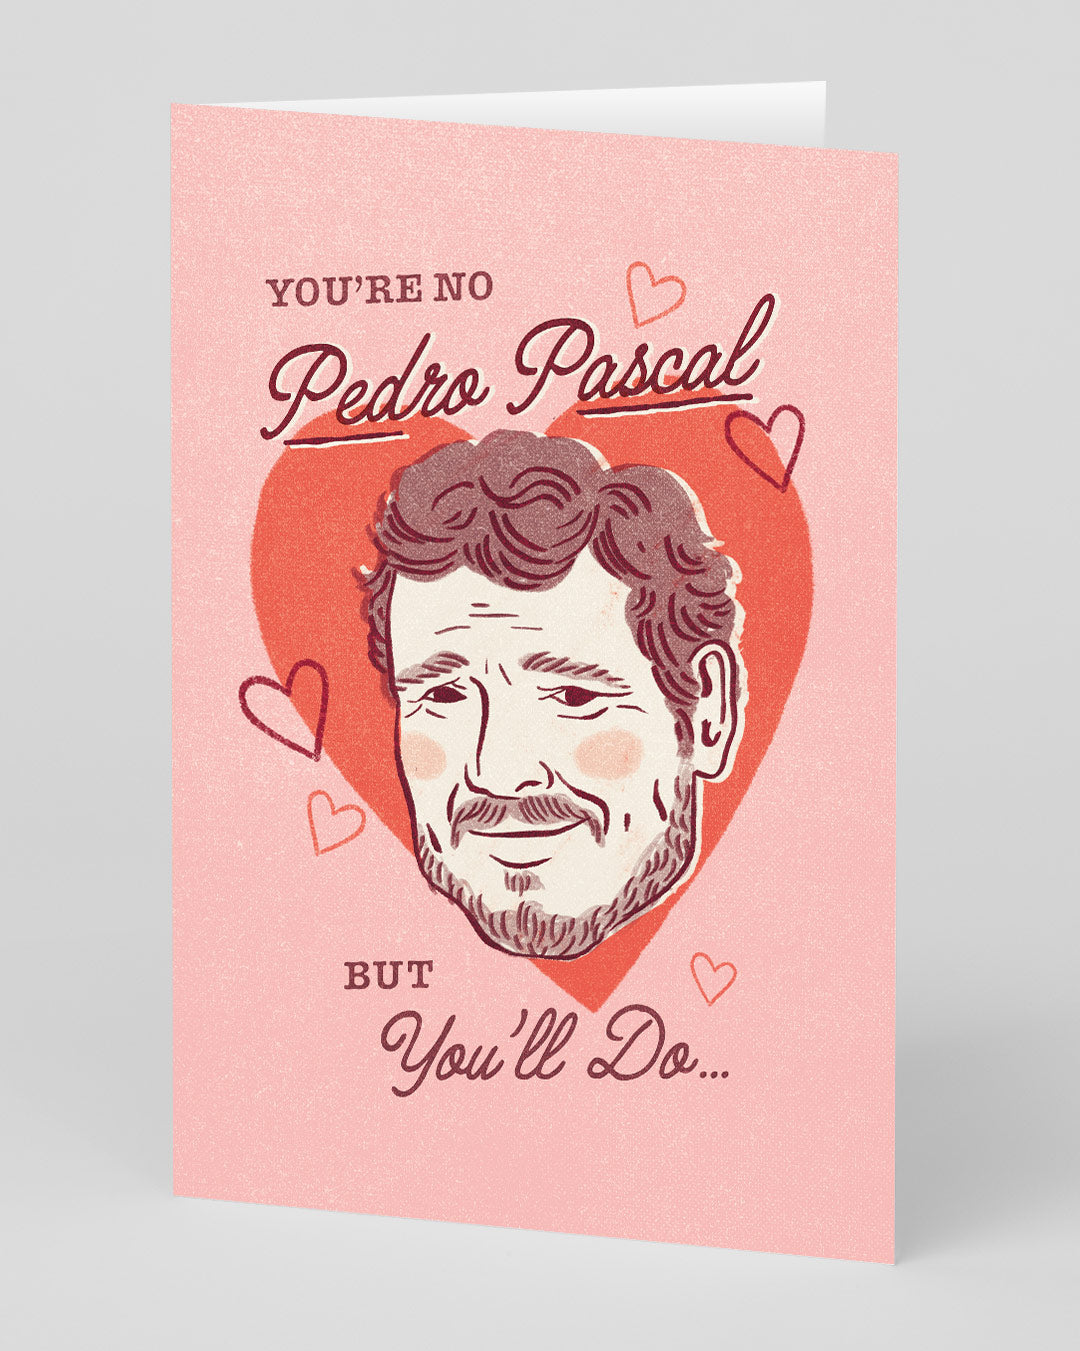 Valentine’s Day | Funny Valentines Card For Pedro Pascal Fans | Personalised You’re No Pedro Pascal Greeting Card | Ohh Deer Unique Valentine’s Card for Him or Her | Made In The UK, Eco-Friendly Materials, Plastic Free Packaging